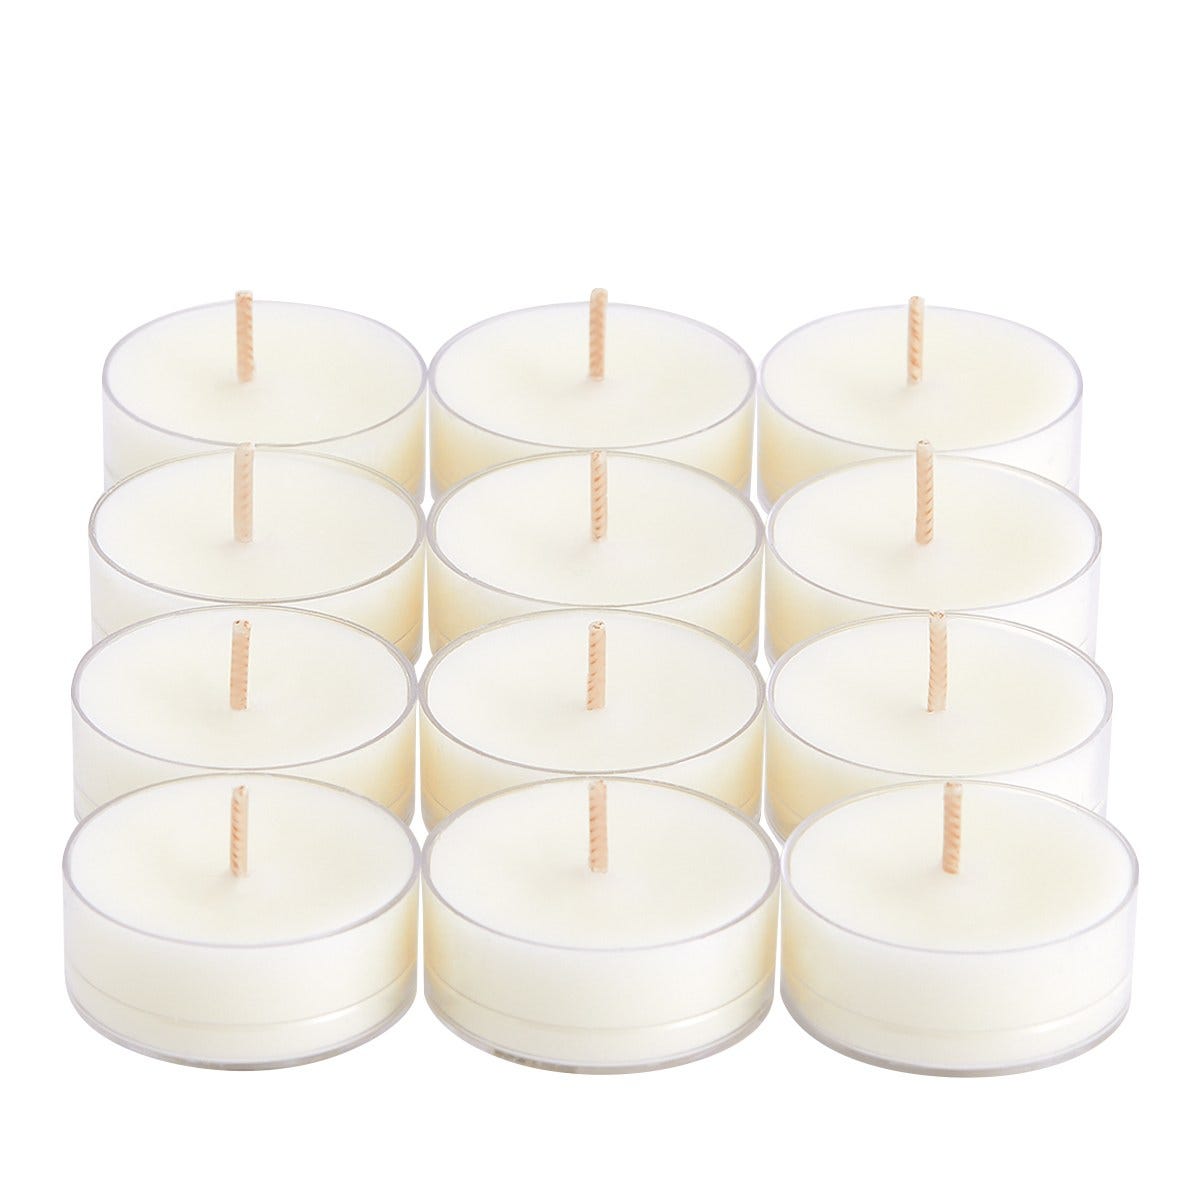 Forest Therapy: cypress + mountain air Universal Tealight® Candles - PartyLite US